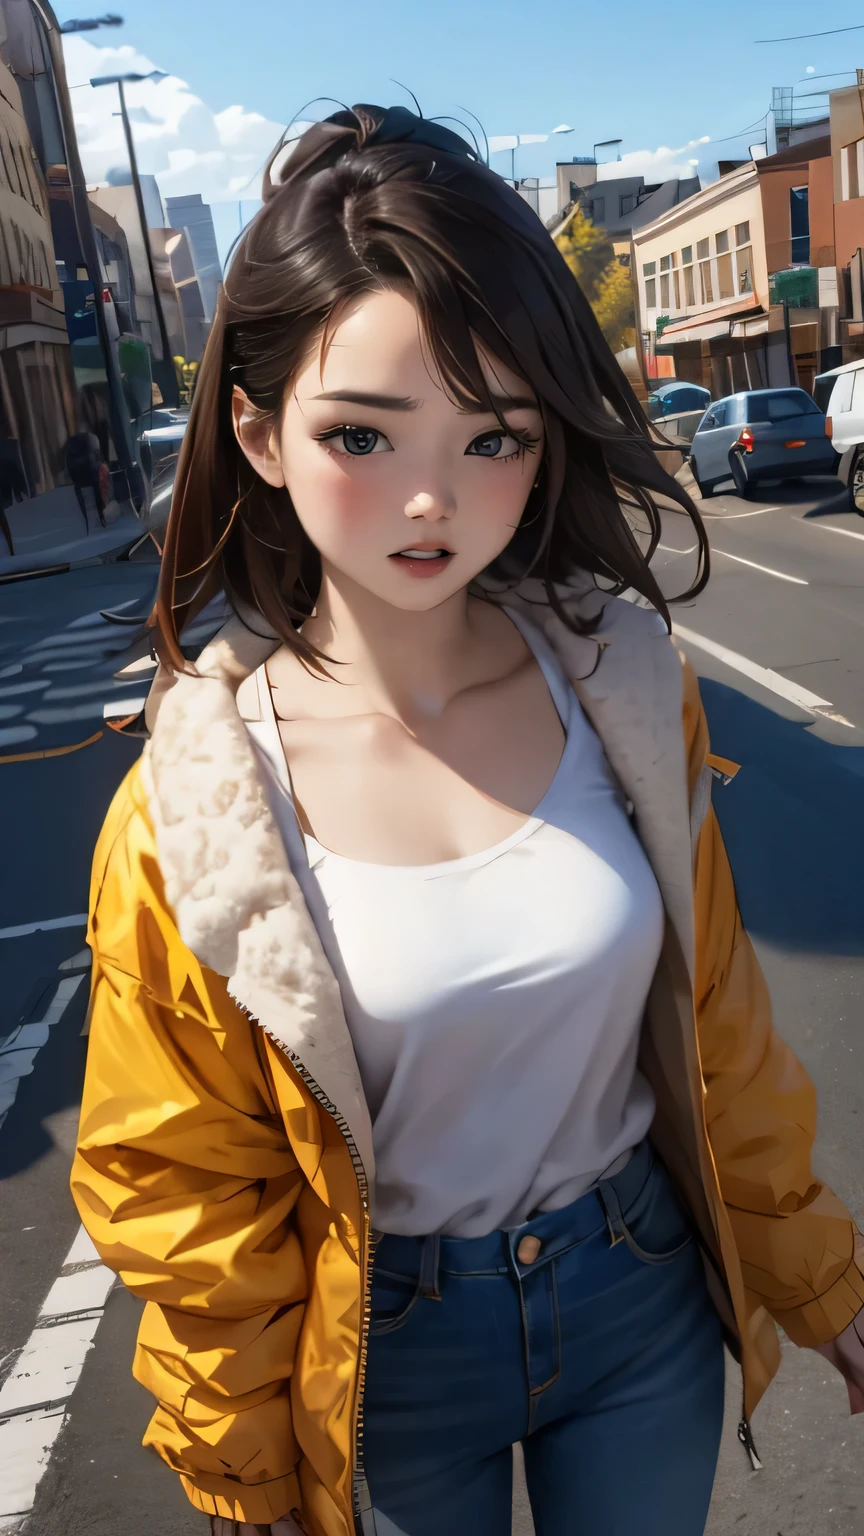 a westerner woman looks at the sky, windy, round face, smile, downtown area, aerial angle, casual clothes, jacket,